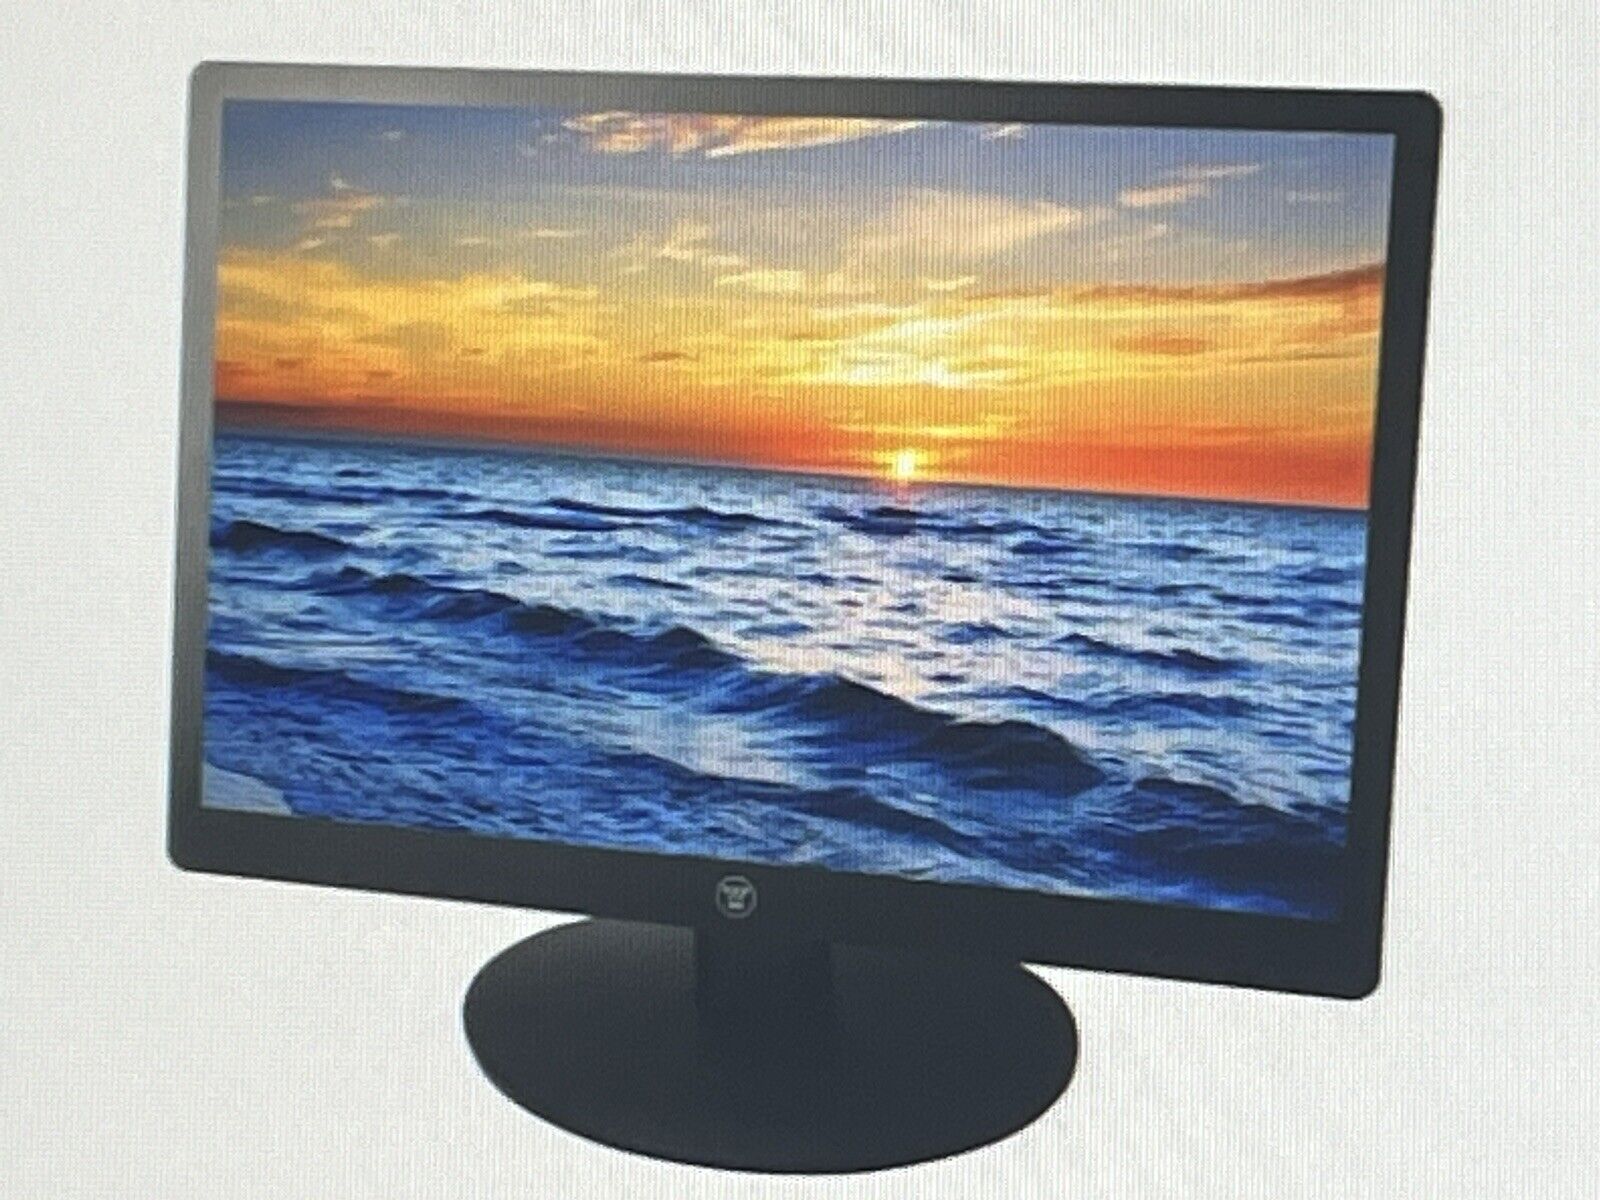 Westinghouse LCM-22w3 22inch Widescreen LCD Computer Monitor In Good Condition